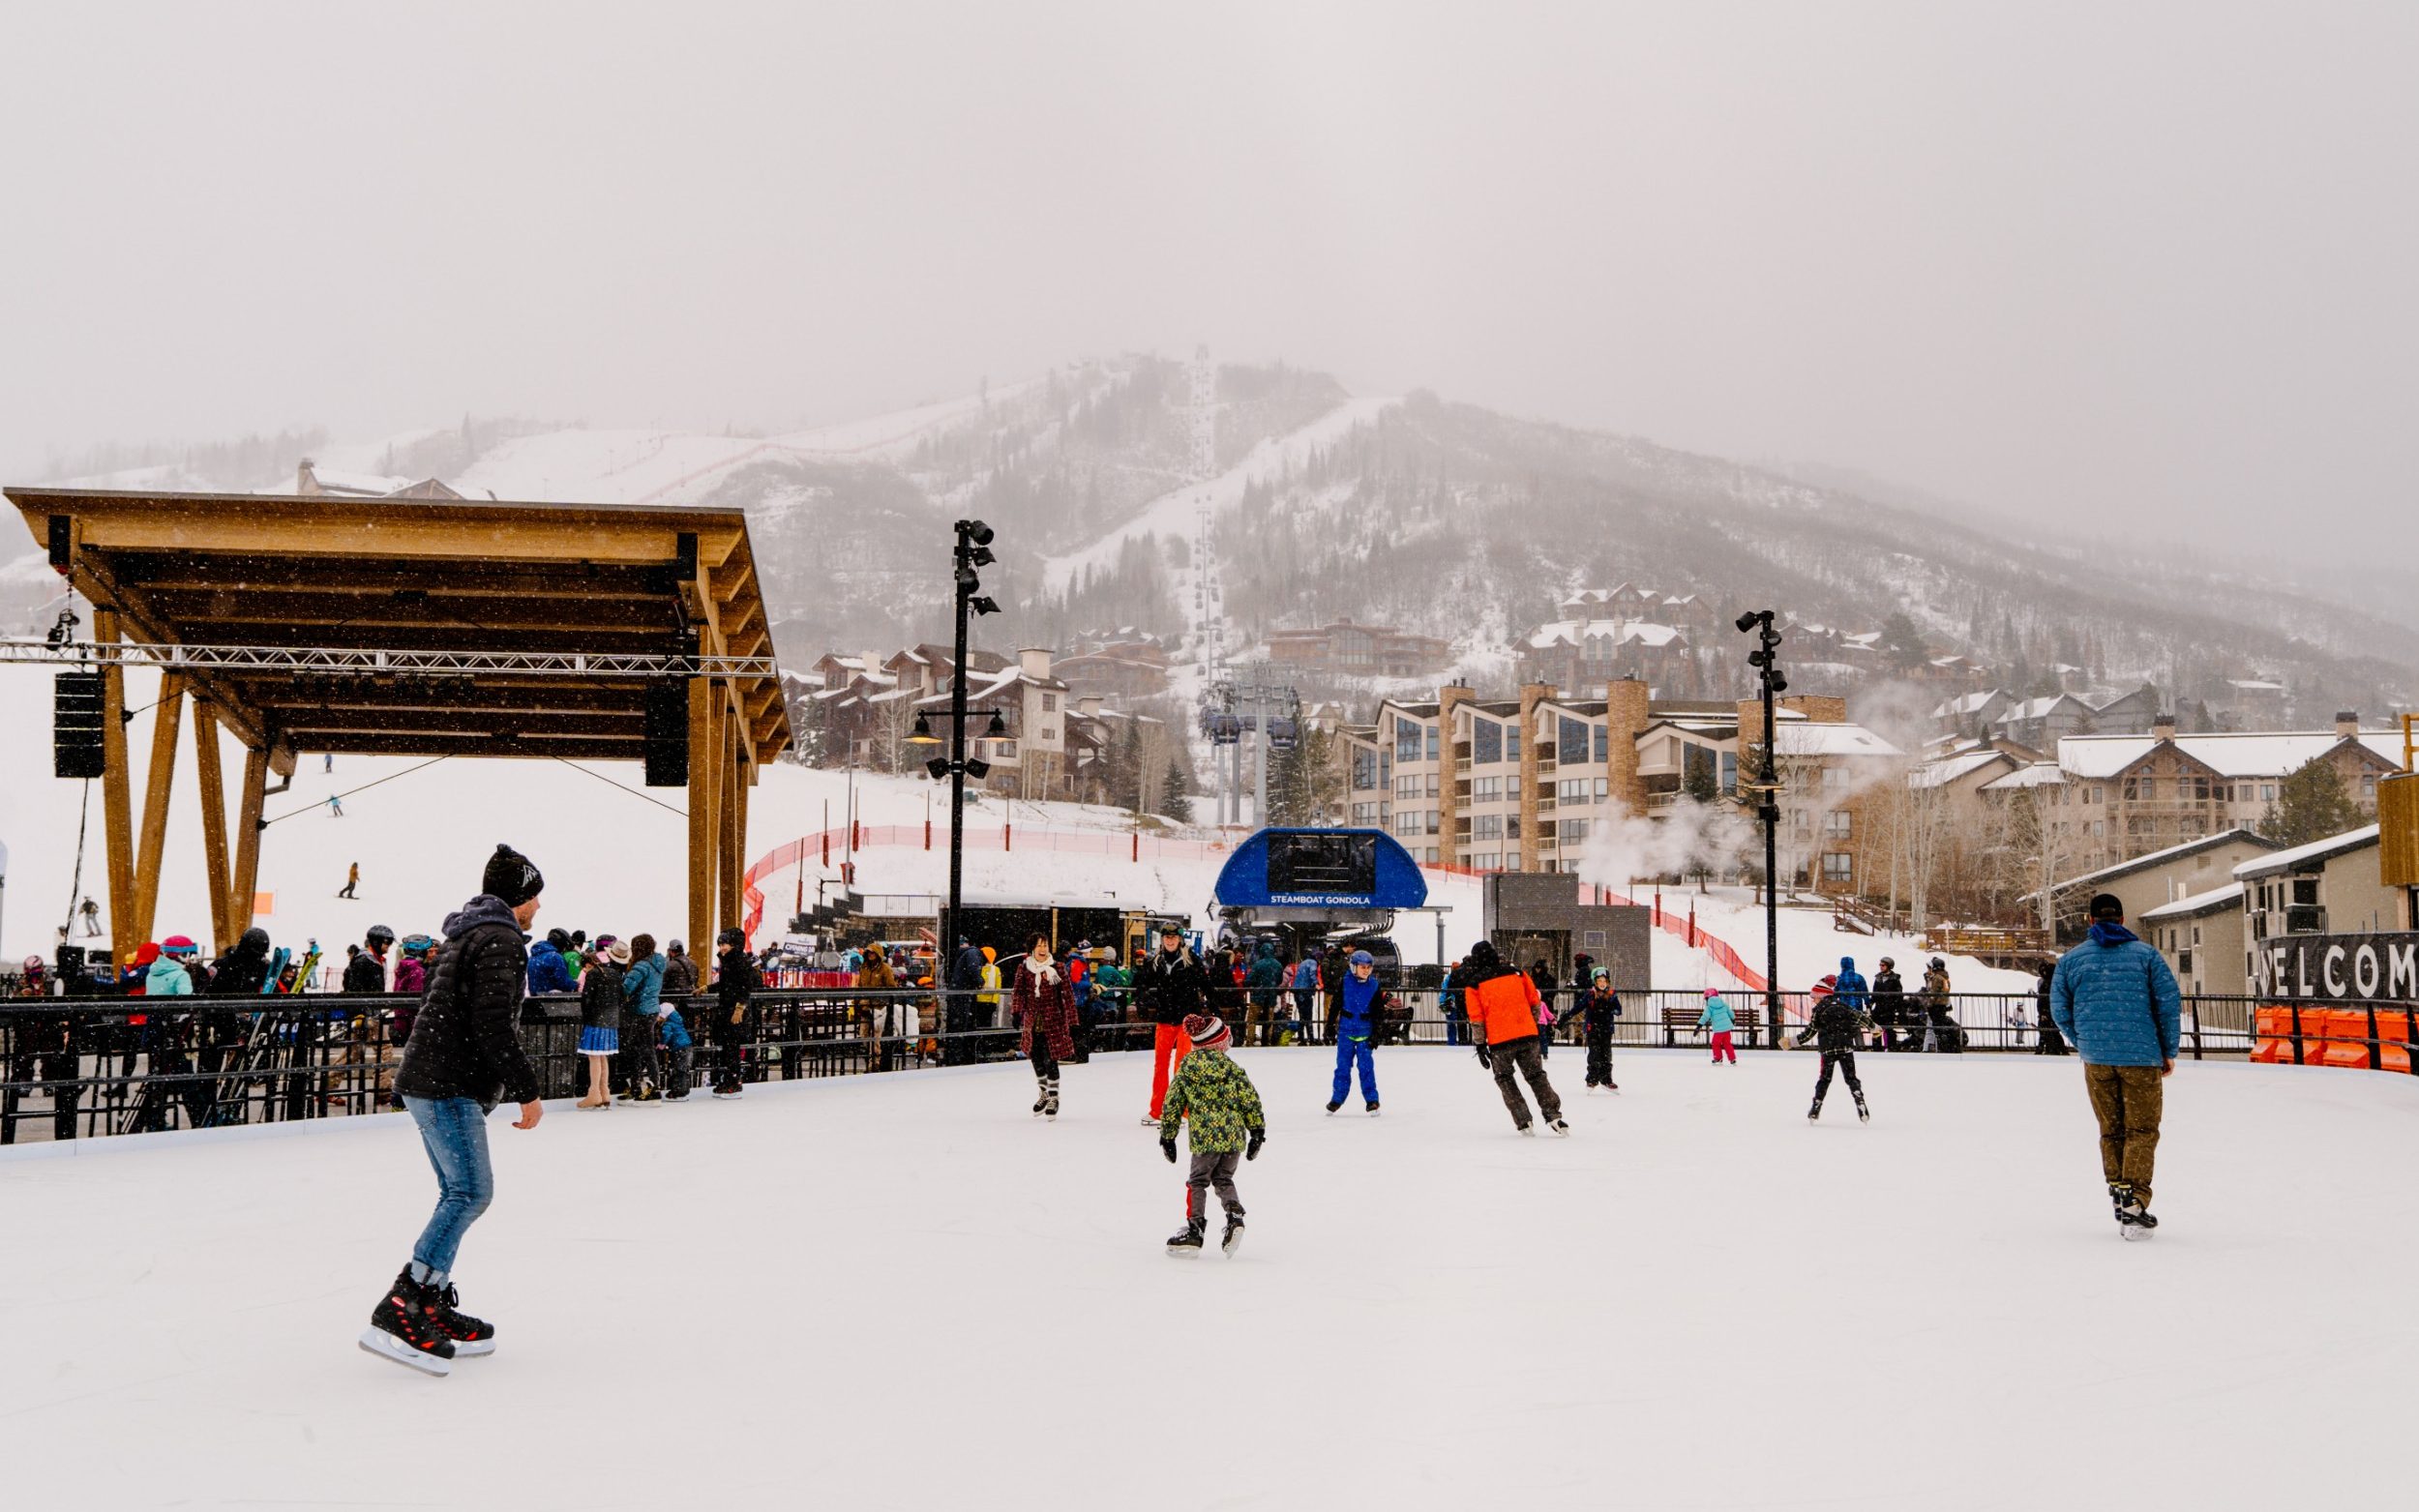 inside the american cowboy town that became a multi-million-dollar ski resort